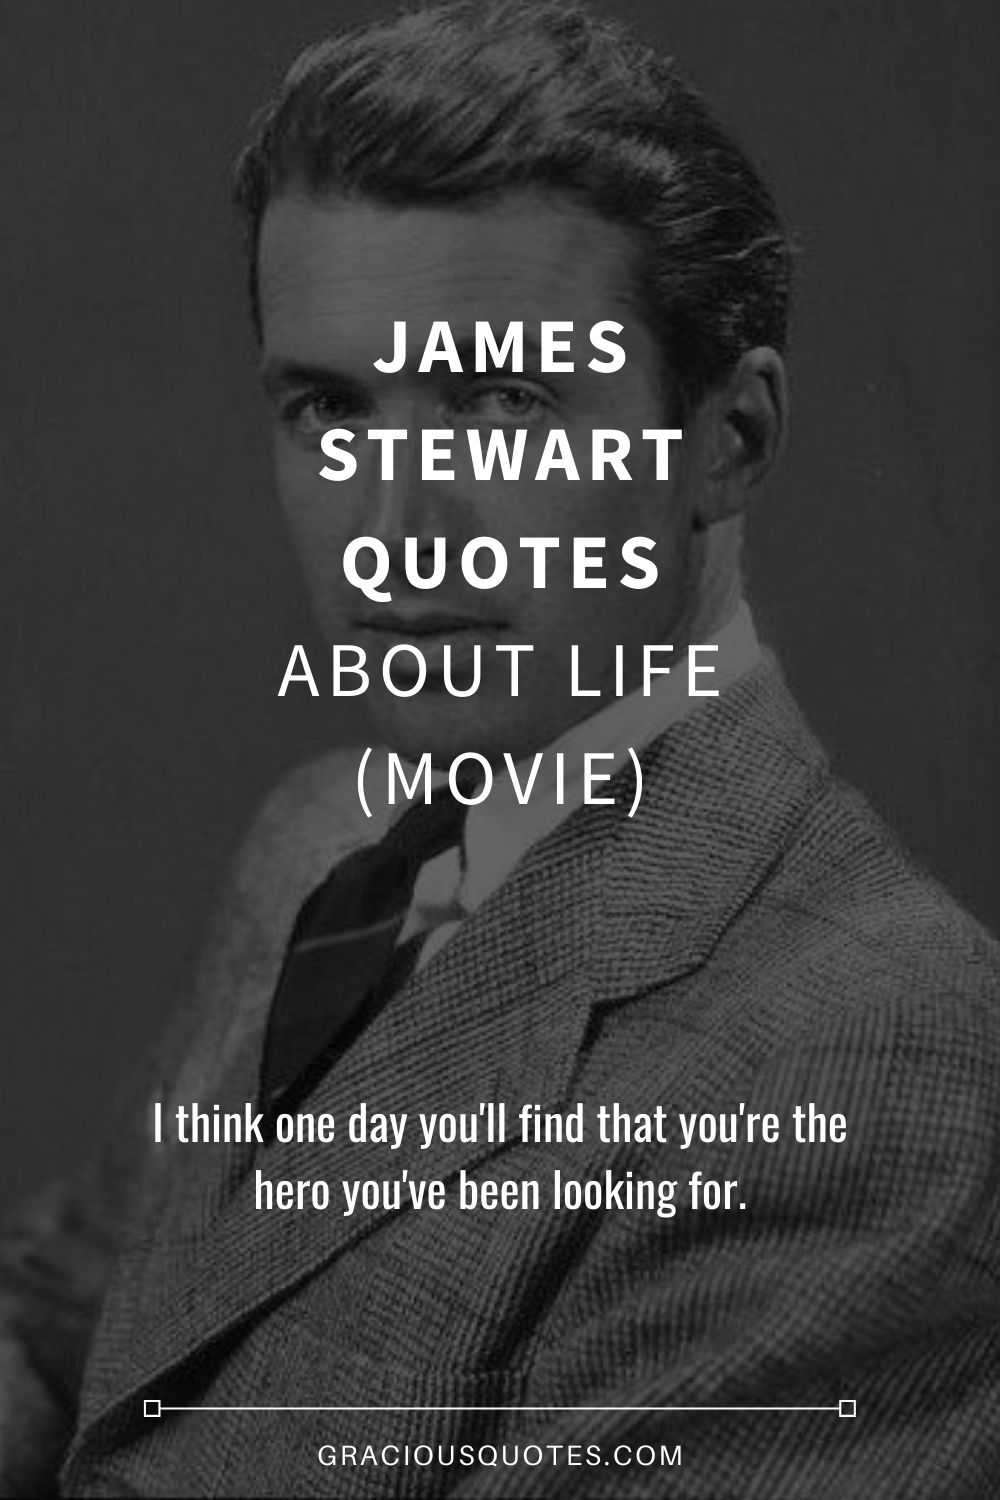 James Stewart Quotes About Life (MOVIE) - Gracious Quotes